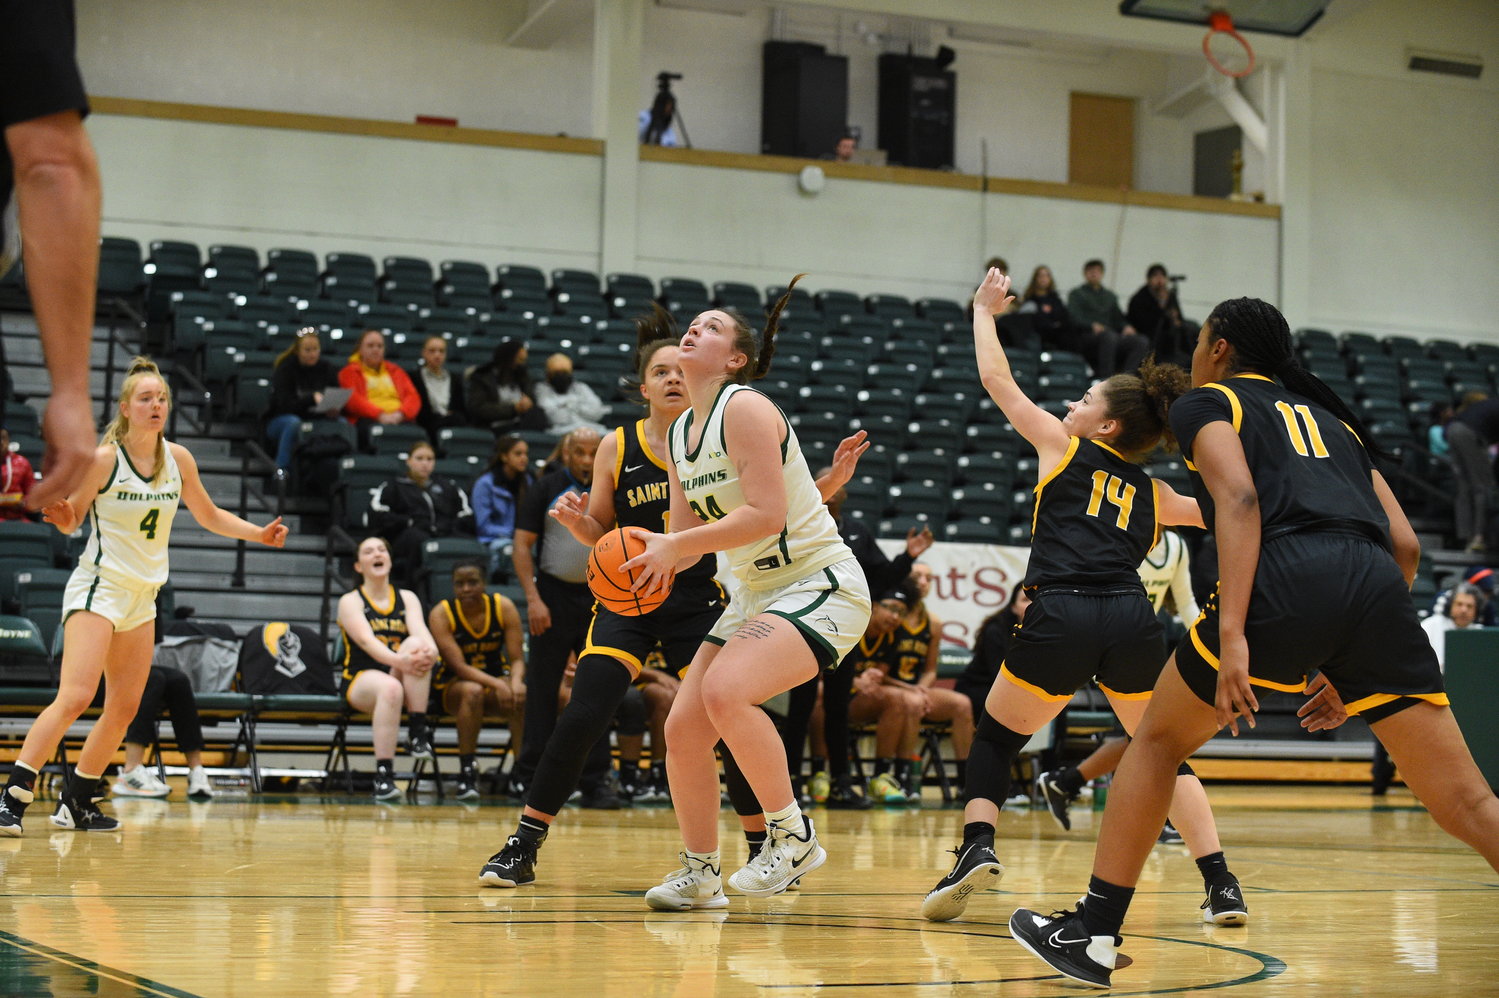 Through five games, Haedyn Roberts, a 6-foot-1 forward, is Le Moyne’s leading scorer, averaging 17.2 points per game.